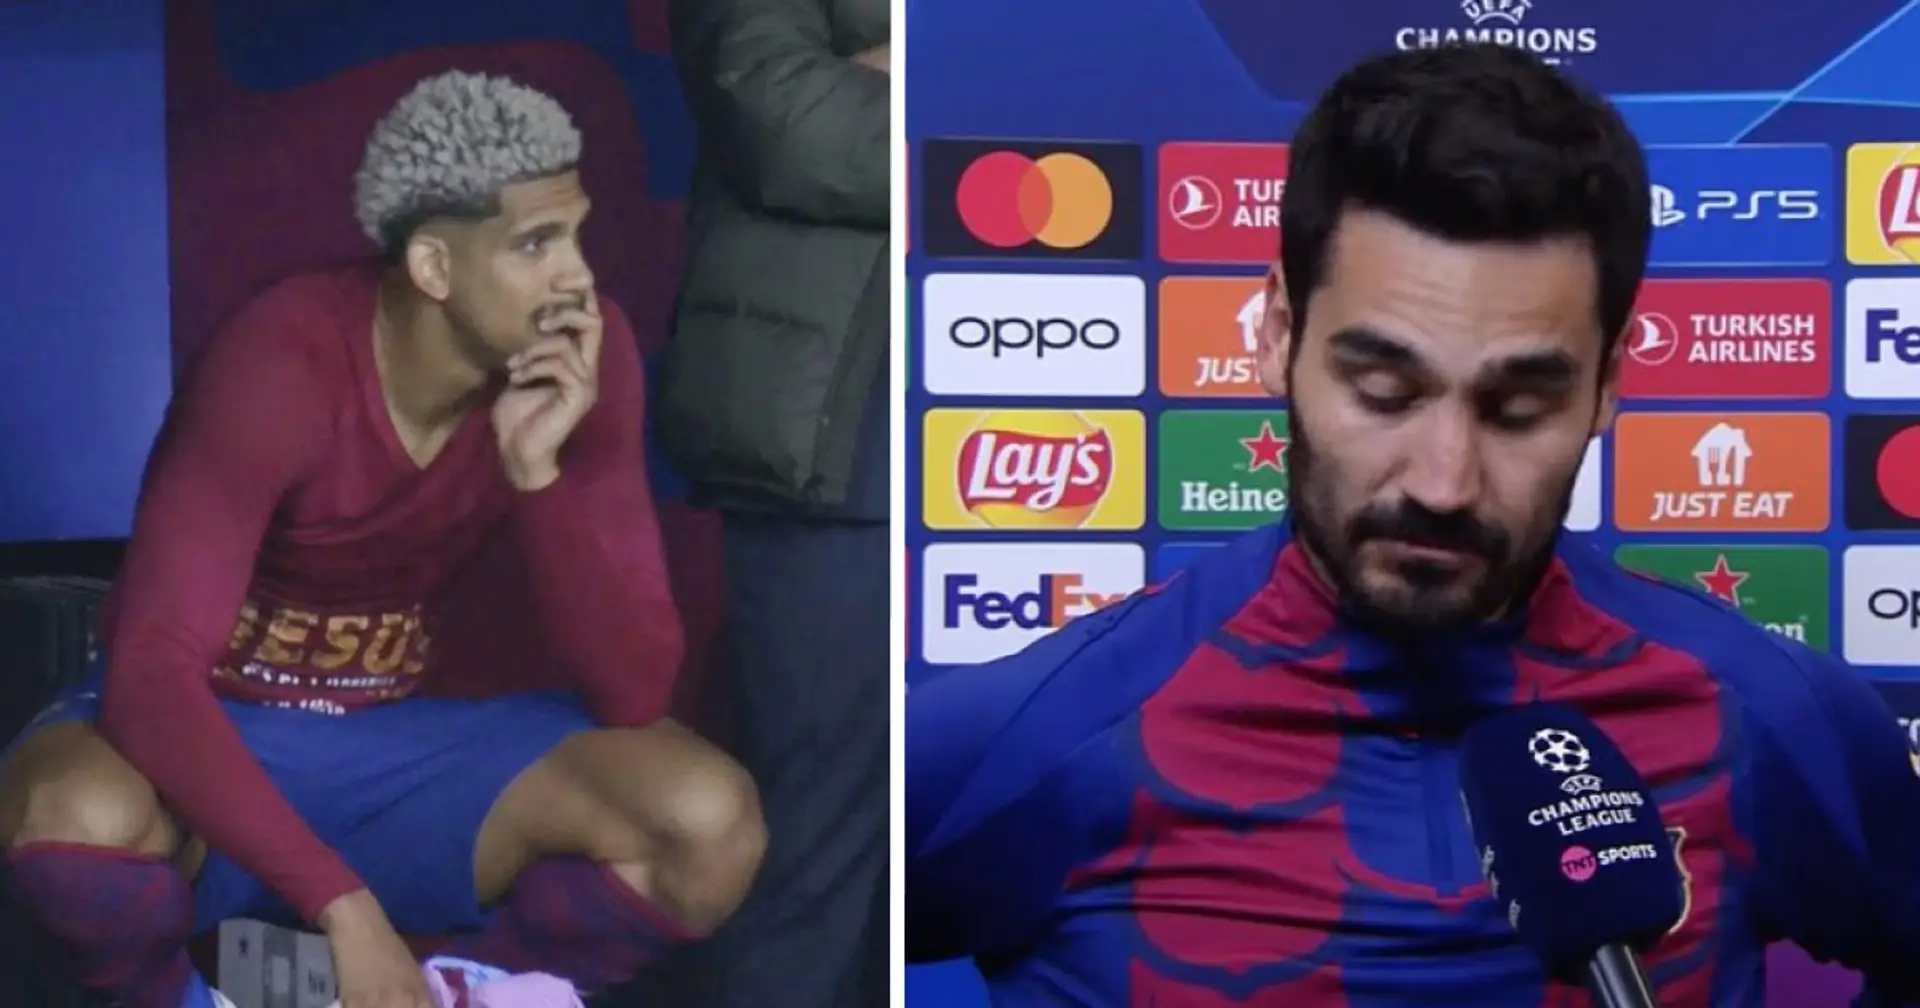 'This is Champions League': Gundogan all but blames Araujo for Barca defeat to PSG